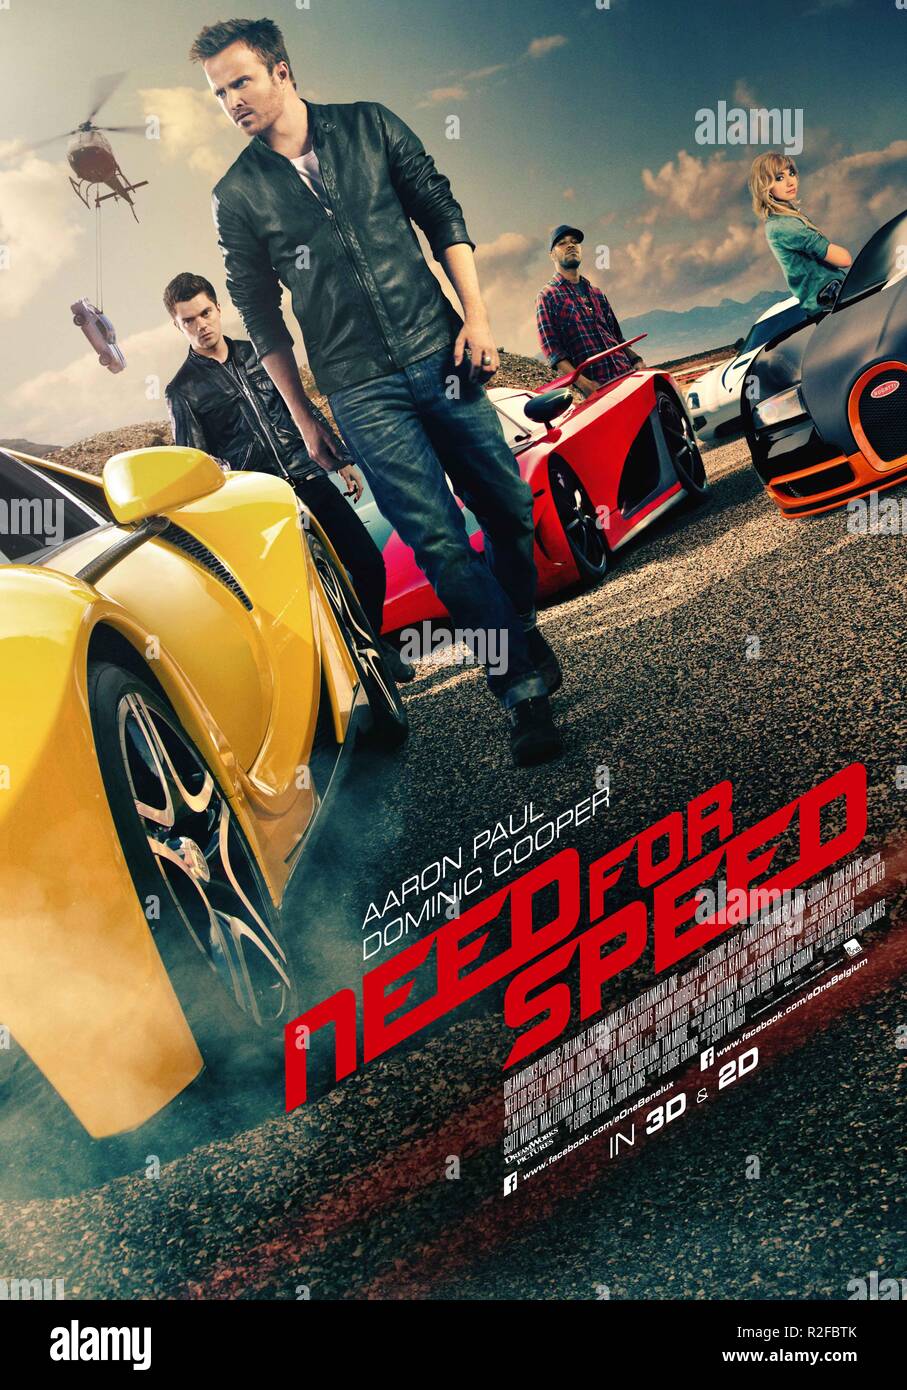 Need for speed film hi-res stock photography and images - Alamy